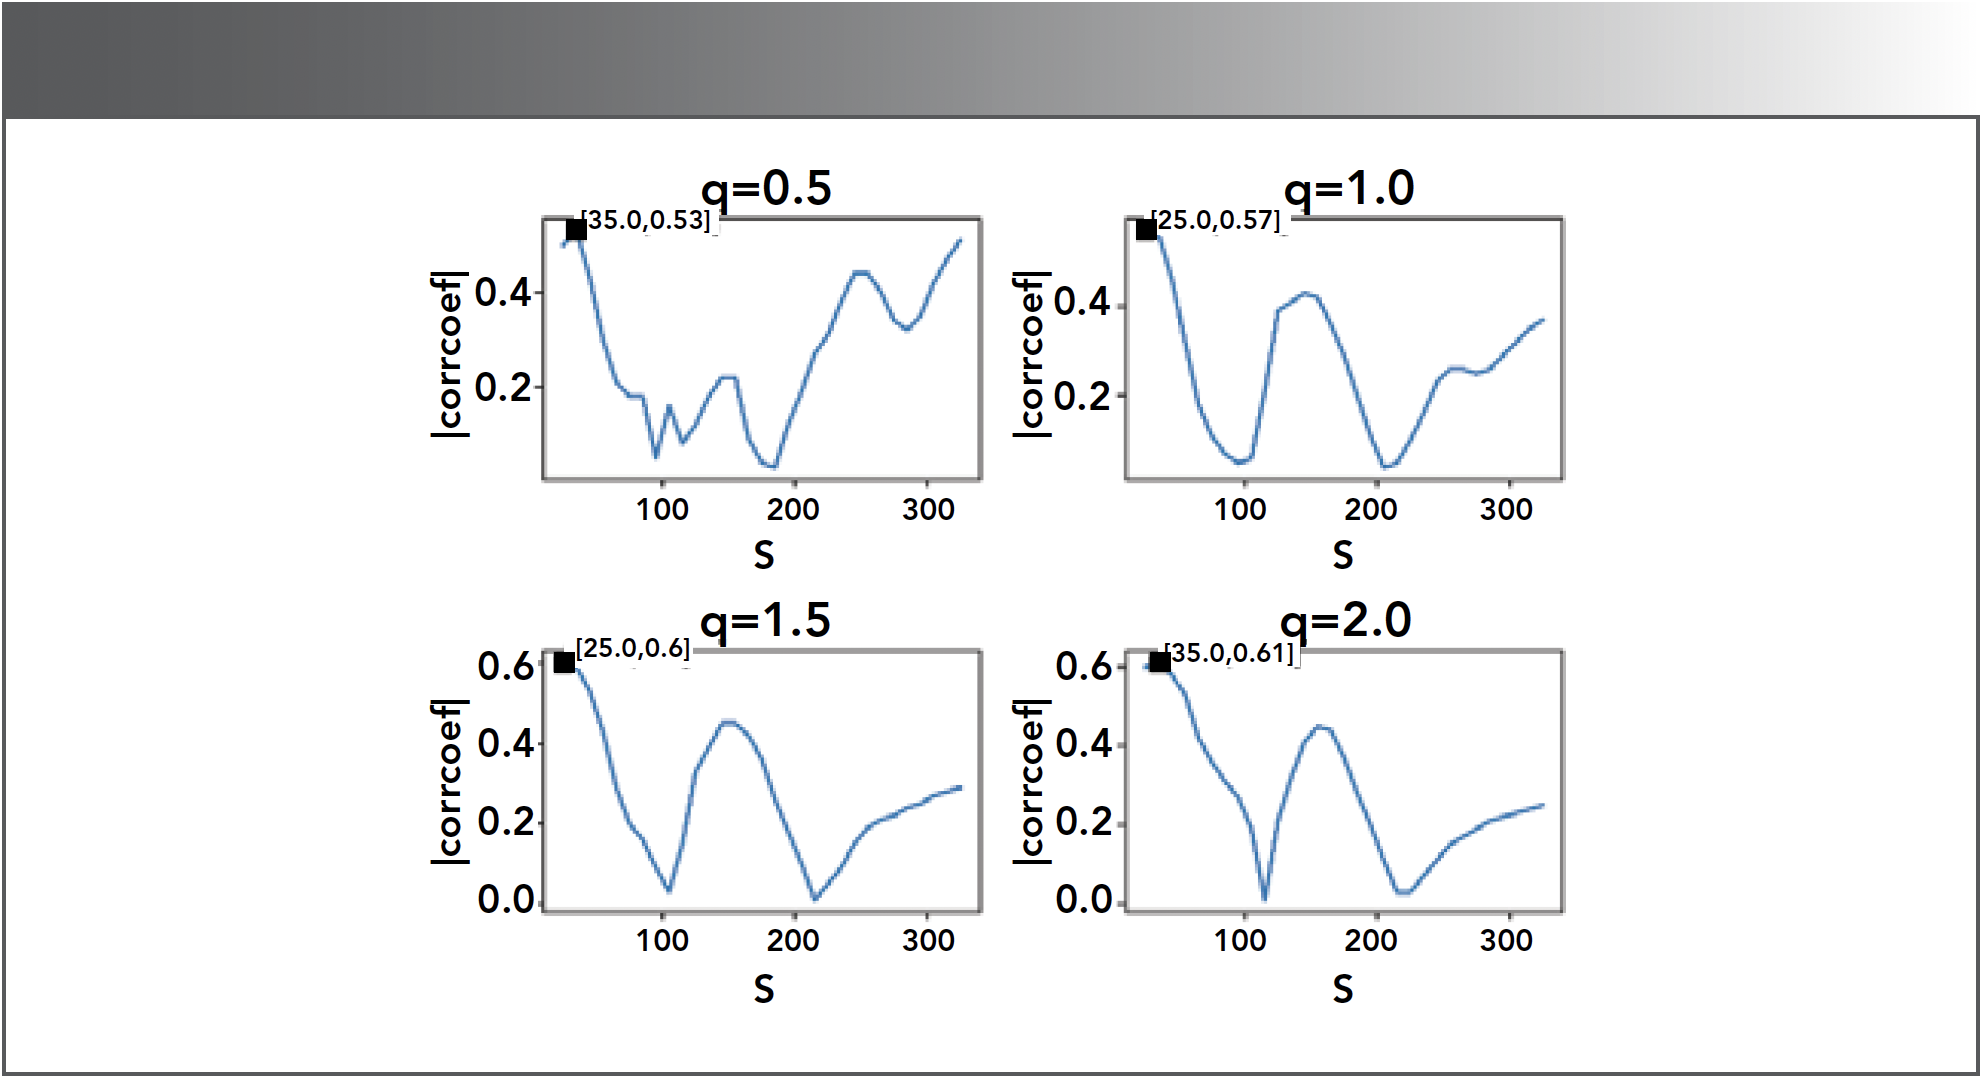 FIGURE 4: Absolute value of the correlation coefficient (|corrcoef|) between h(q,s) and SOM content. Here, q denotes the order of the average fluctuation function. With q values of 0.5, 1.0, 1.5, and 2.0, the four subplots depict the trend of |corrcoef| as the length of the fitting window s varies.